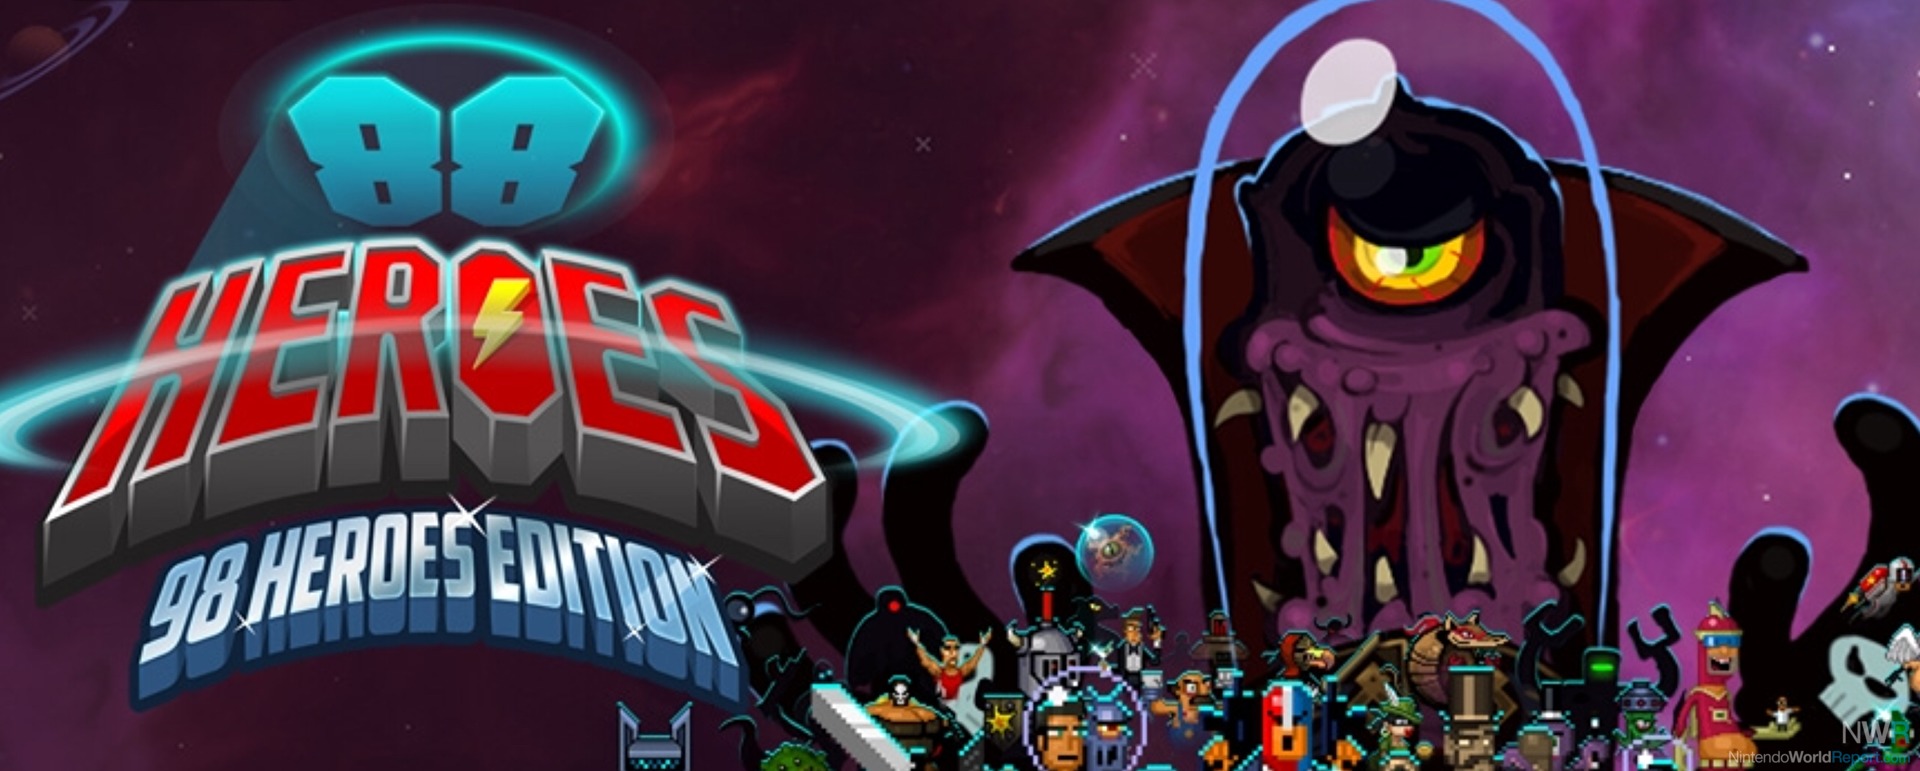 88 Heroes: 98 Heroes Edition Review - Review - Nintendo World Report